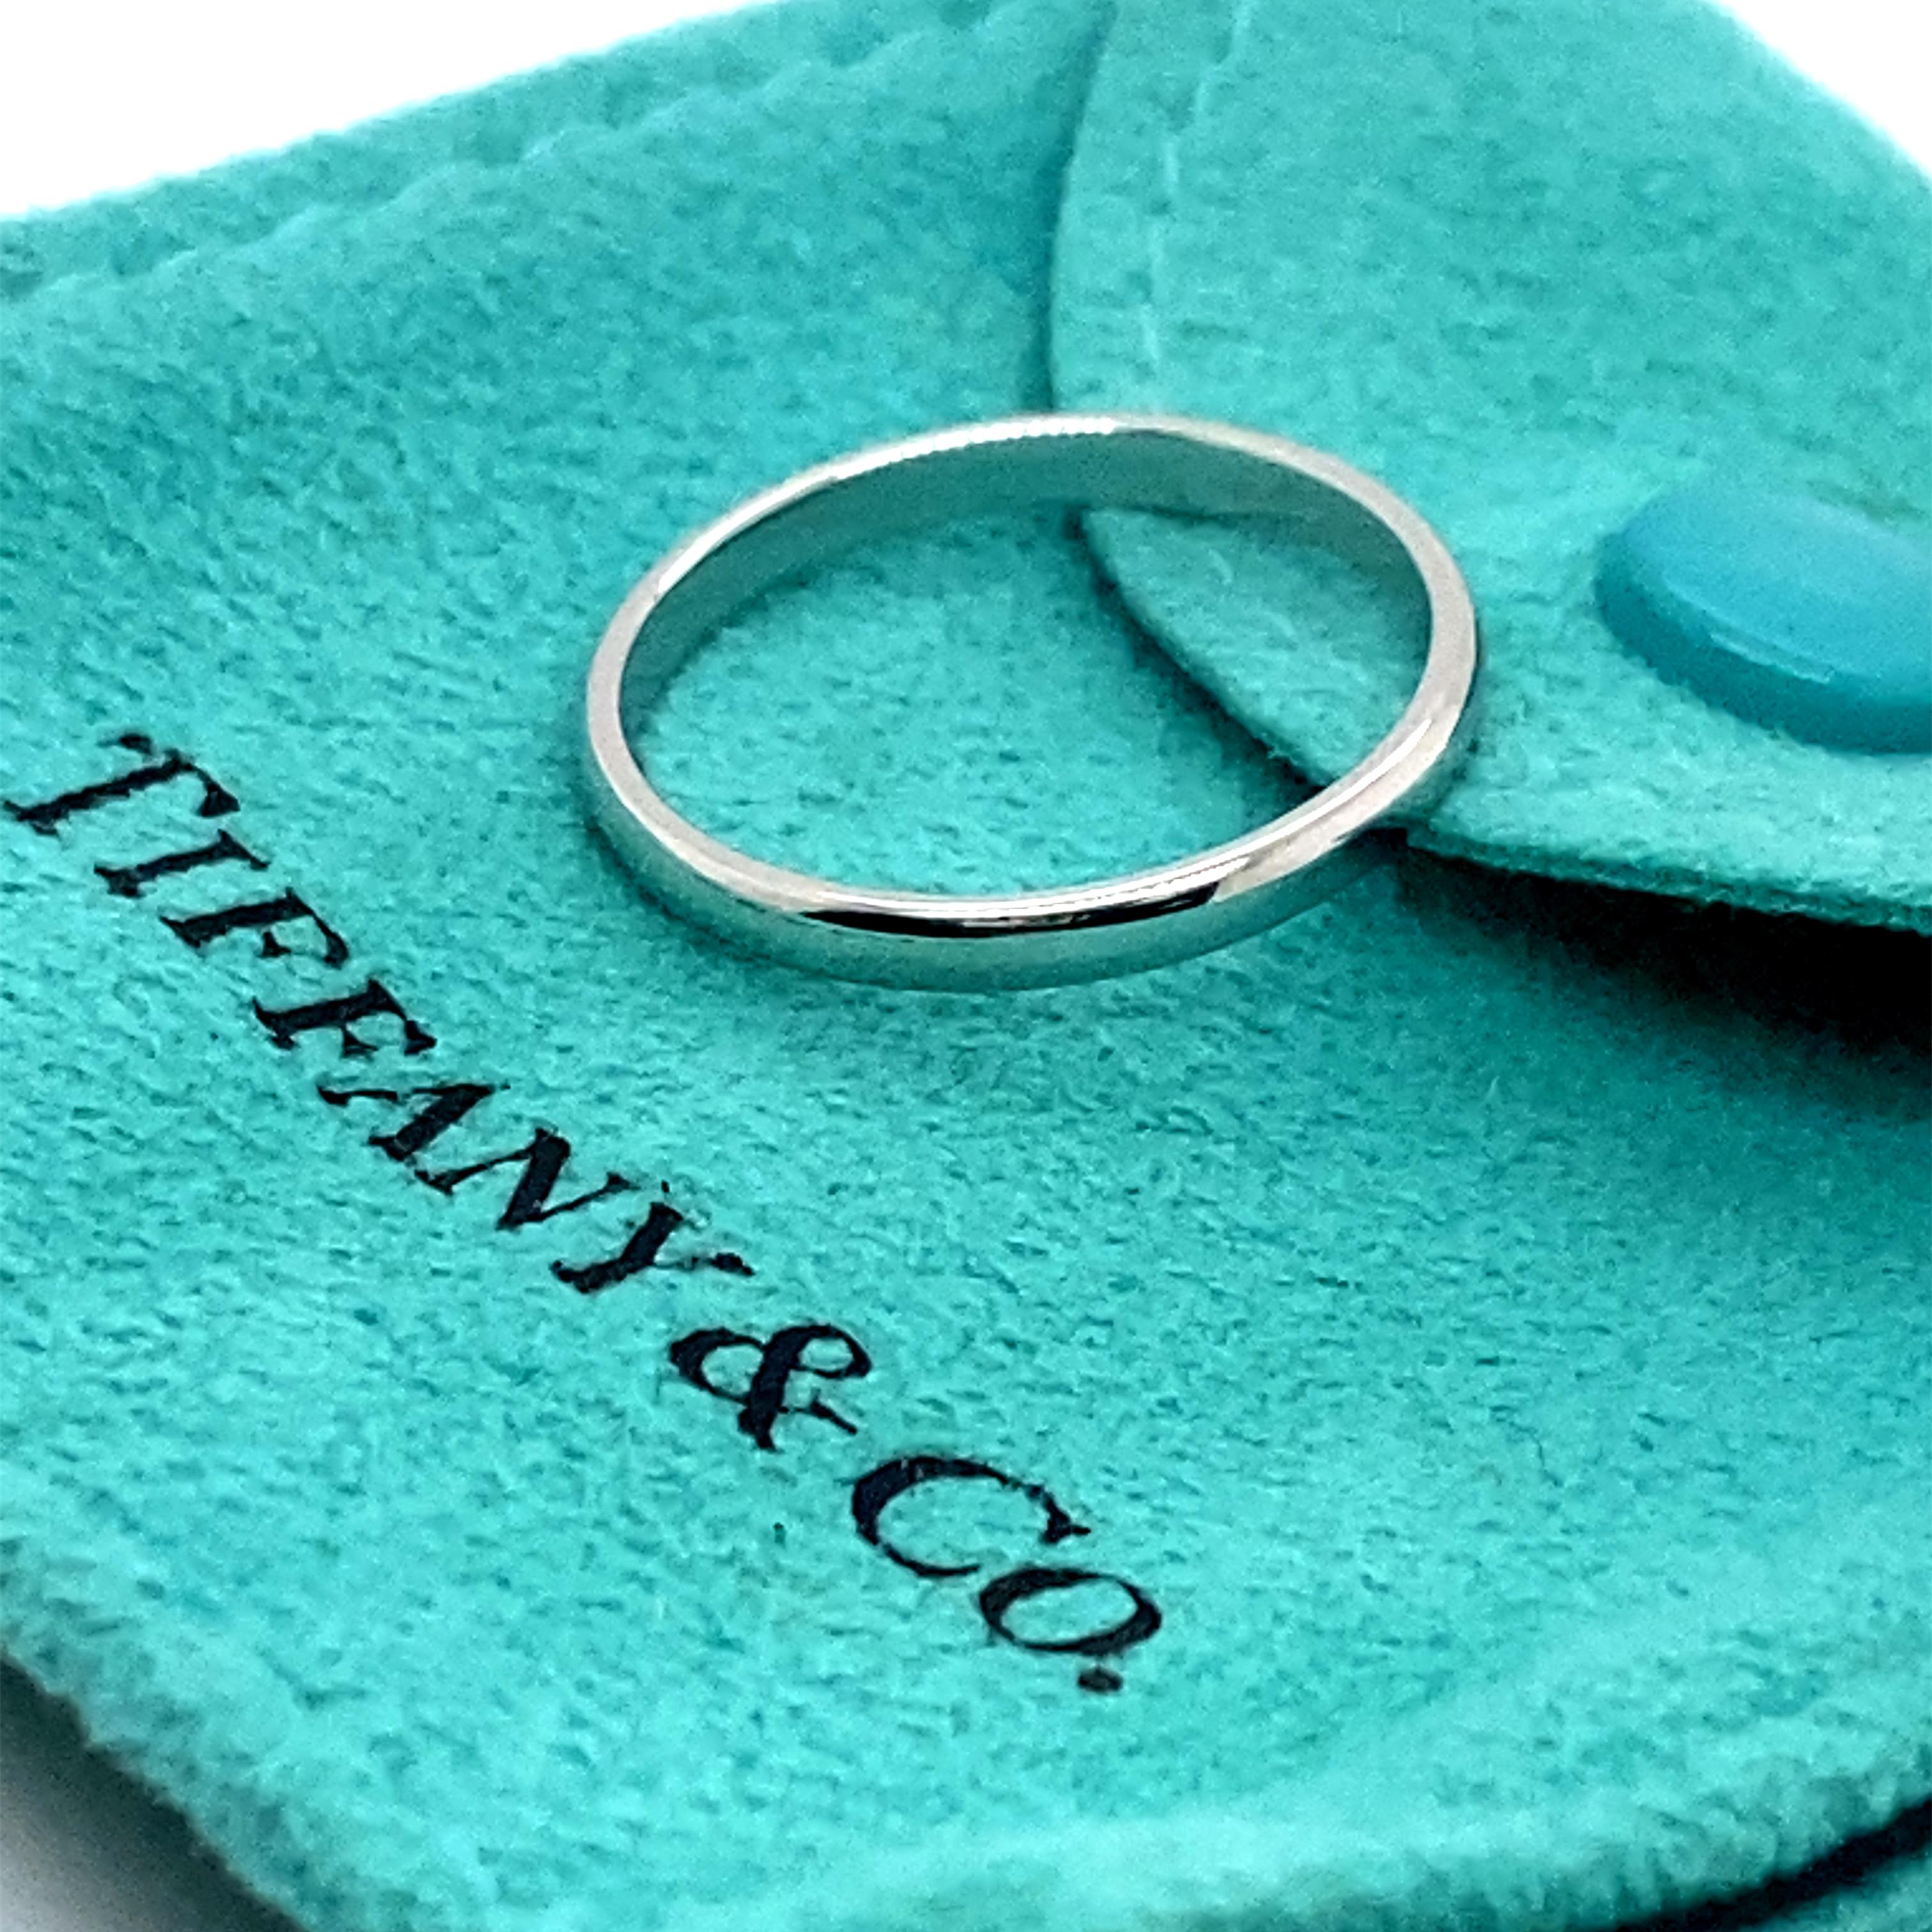 Tiffany & Co Classic Band Ring
Style:  Classic
Ref. number:  Sku# 60001623
Metal:  Platinum
Size:  6.75
Measurements:  2 MM 
Hallmark:  ©TIFFANY&CO PT950
Includes:  T&C Ring Pouch
Retail:  $900
Sku##11068BJ051222-6.75